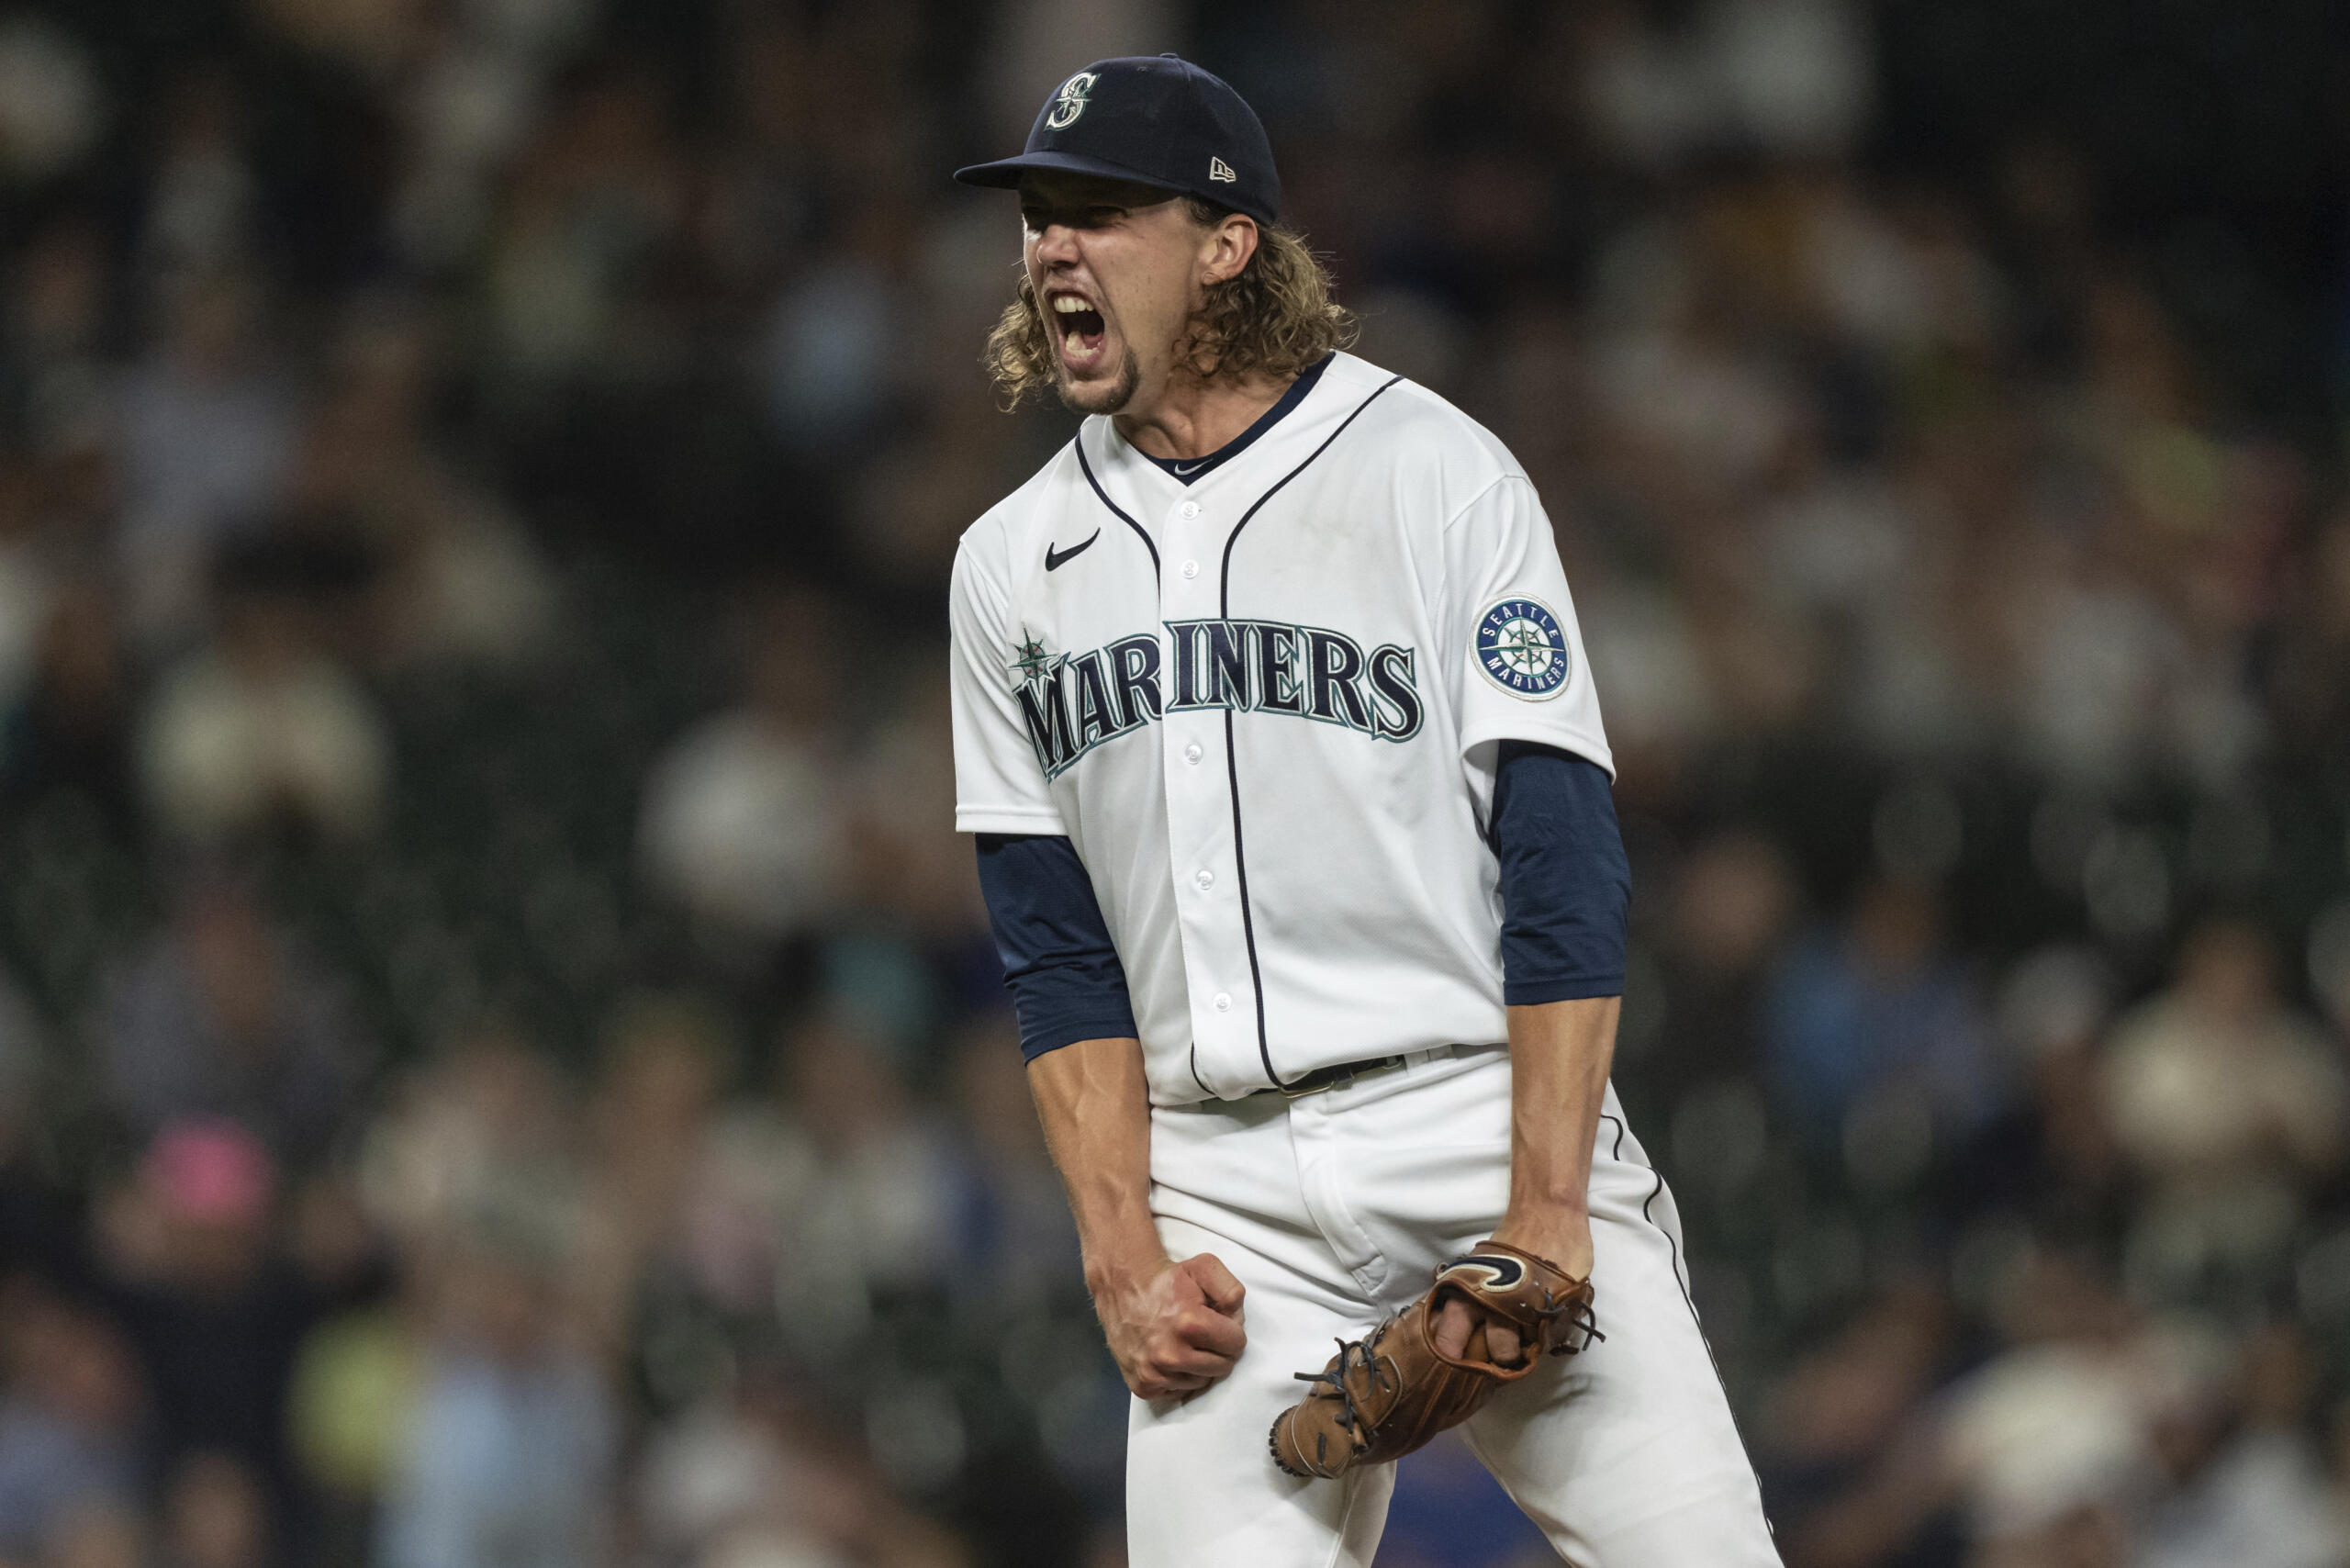 Seattle Mariners starting pitcher Logan Gilbert reacts after striking out Chicago White Sox's AJ Pollock during the sixth inning of a baseball game Tuesday, Sept. 6, 2022, in Seattle.